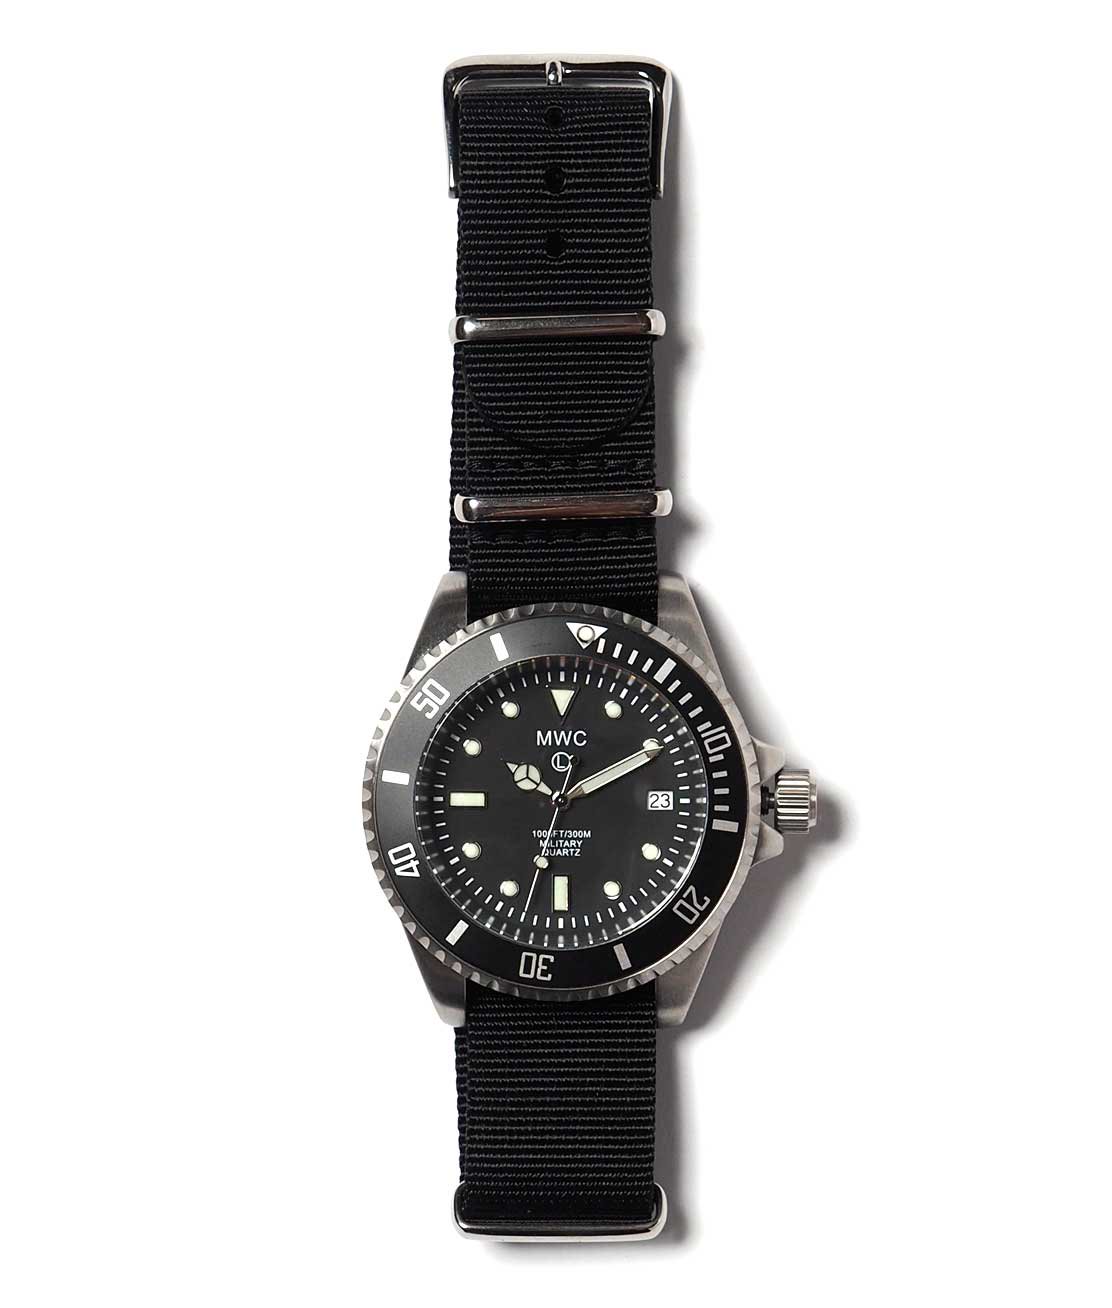 MWC】MWC SPECIAL DIVER WATCH - GREY ダイバーズウォッチ - HUNKY ...